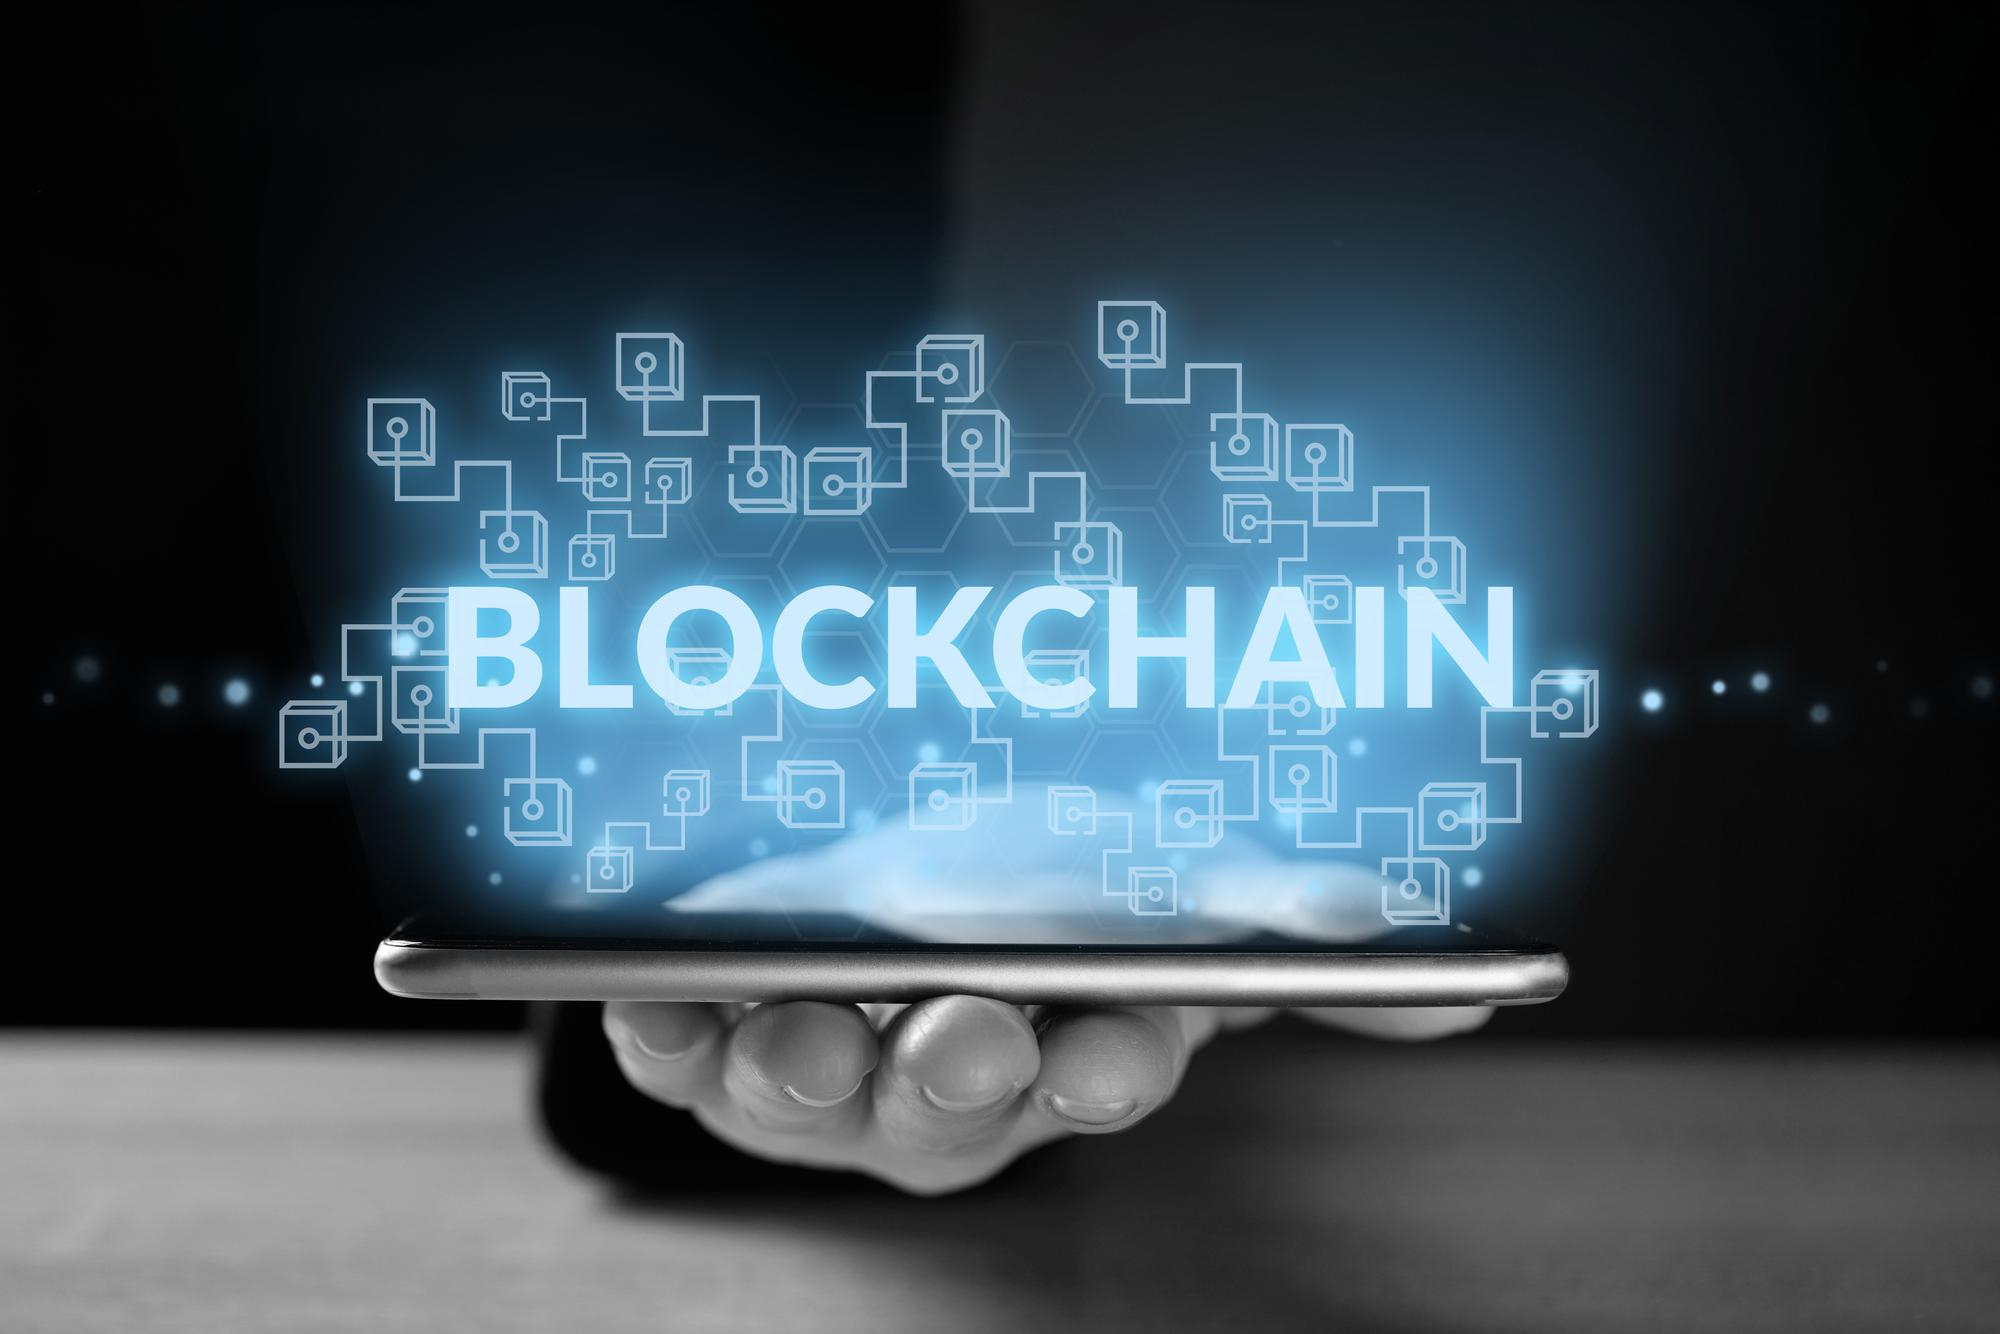 blockchain in digital marketing - picture include the mobile phone on a human hand and it's srcreen light display 'BLOCKCHAIN' word.